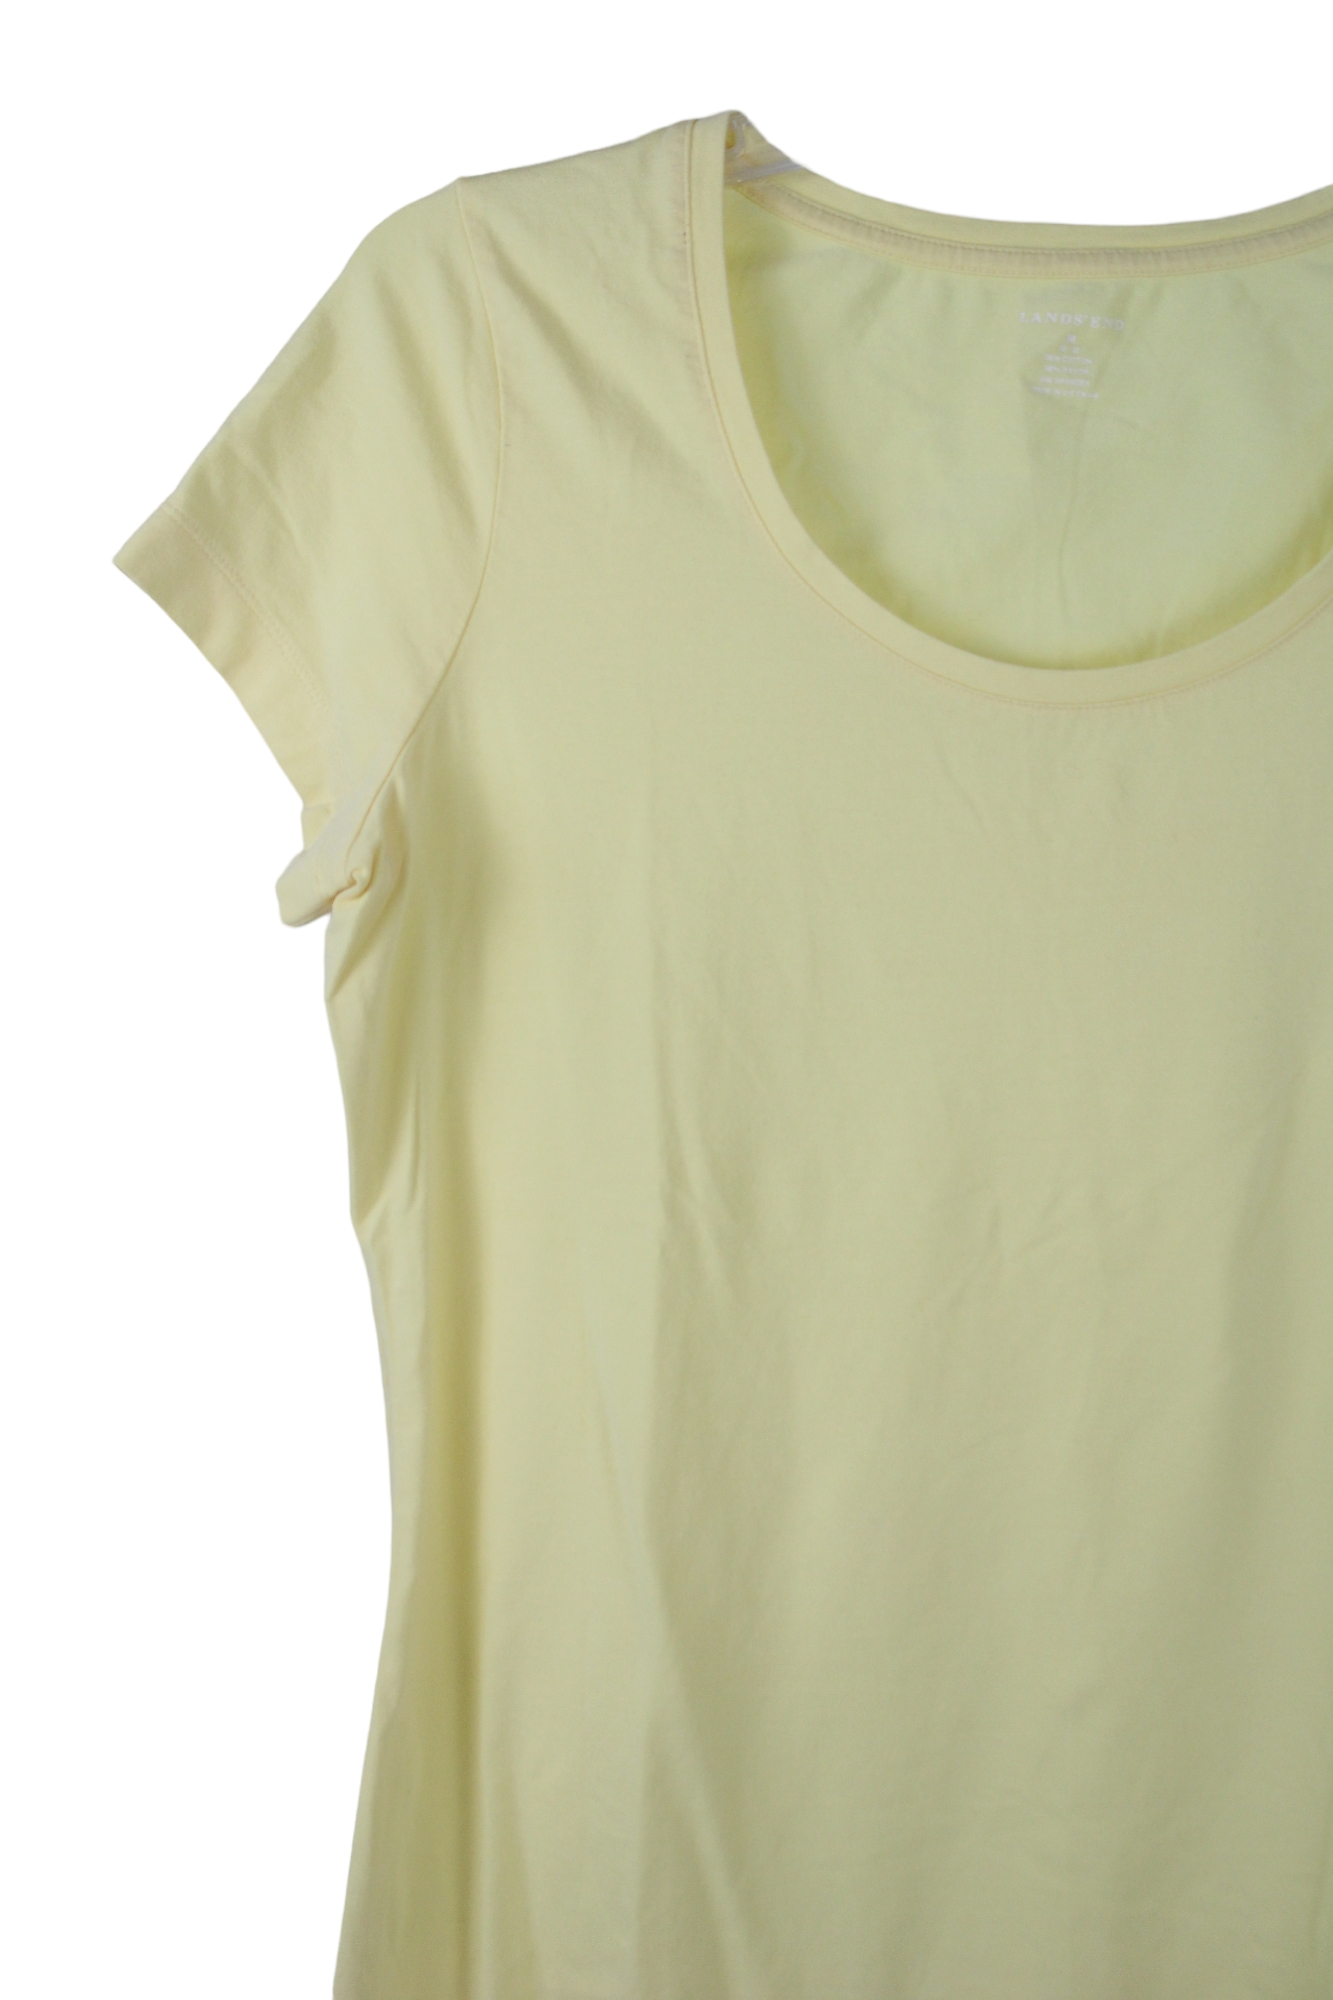 Lands' End Pale Yellow Butter Soft Tee | M